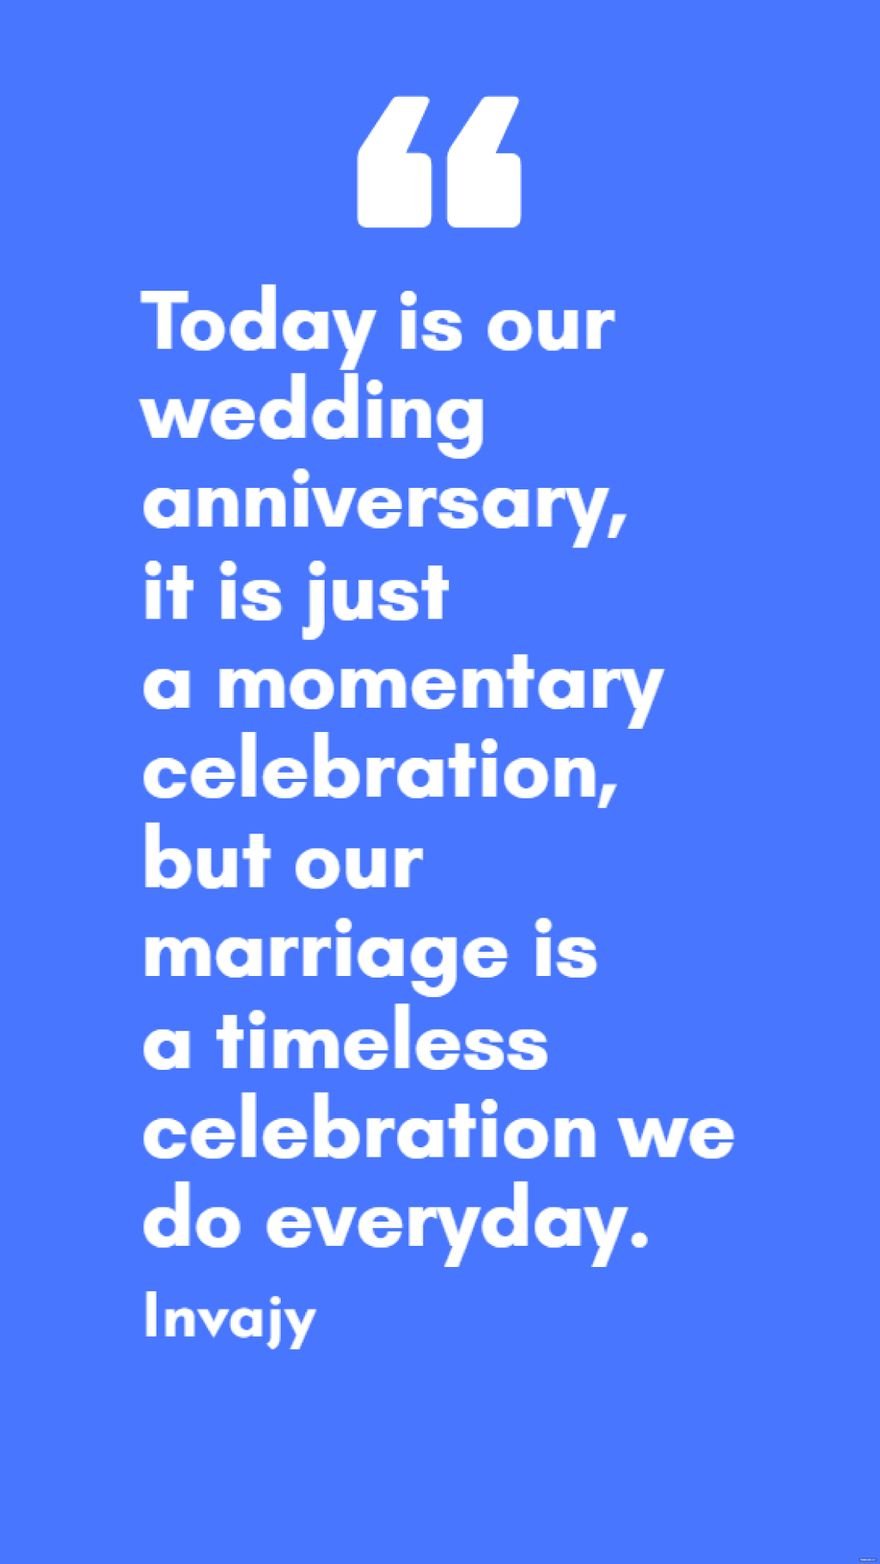 Invajy - Today is our wedding anniversary, it is just a momentary celebration, but our marriage is a timeless celebration we do everyday.